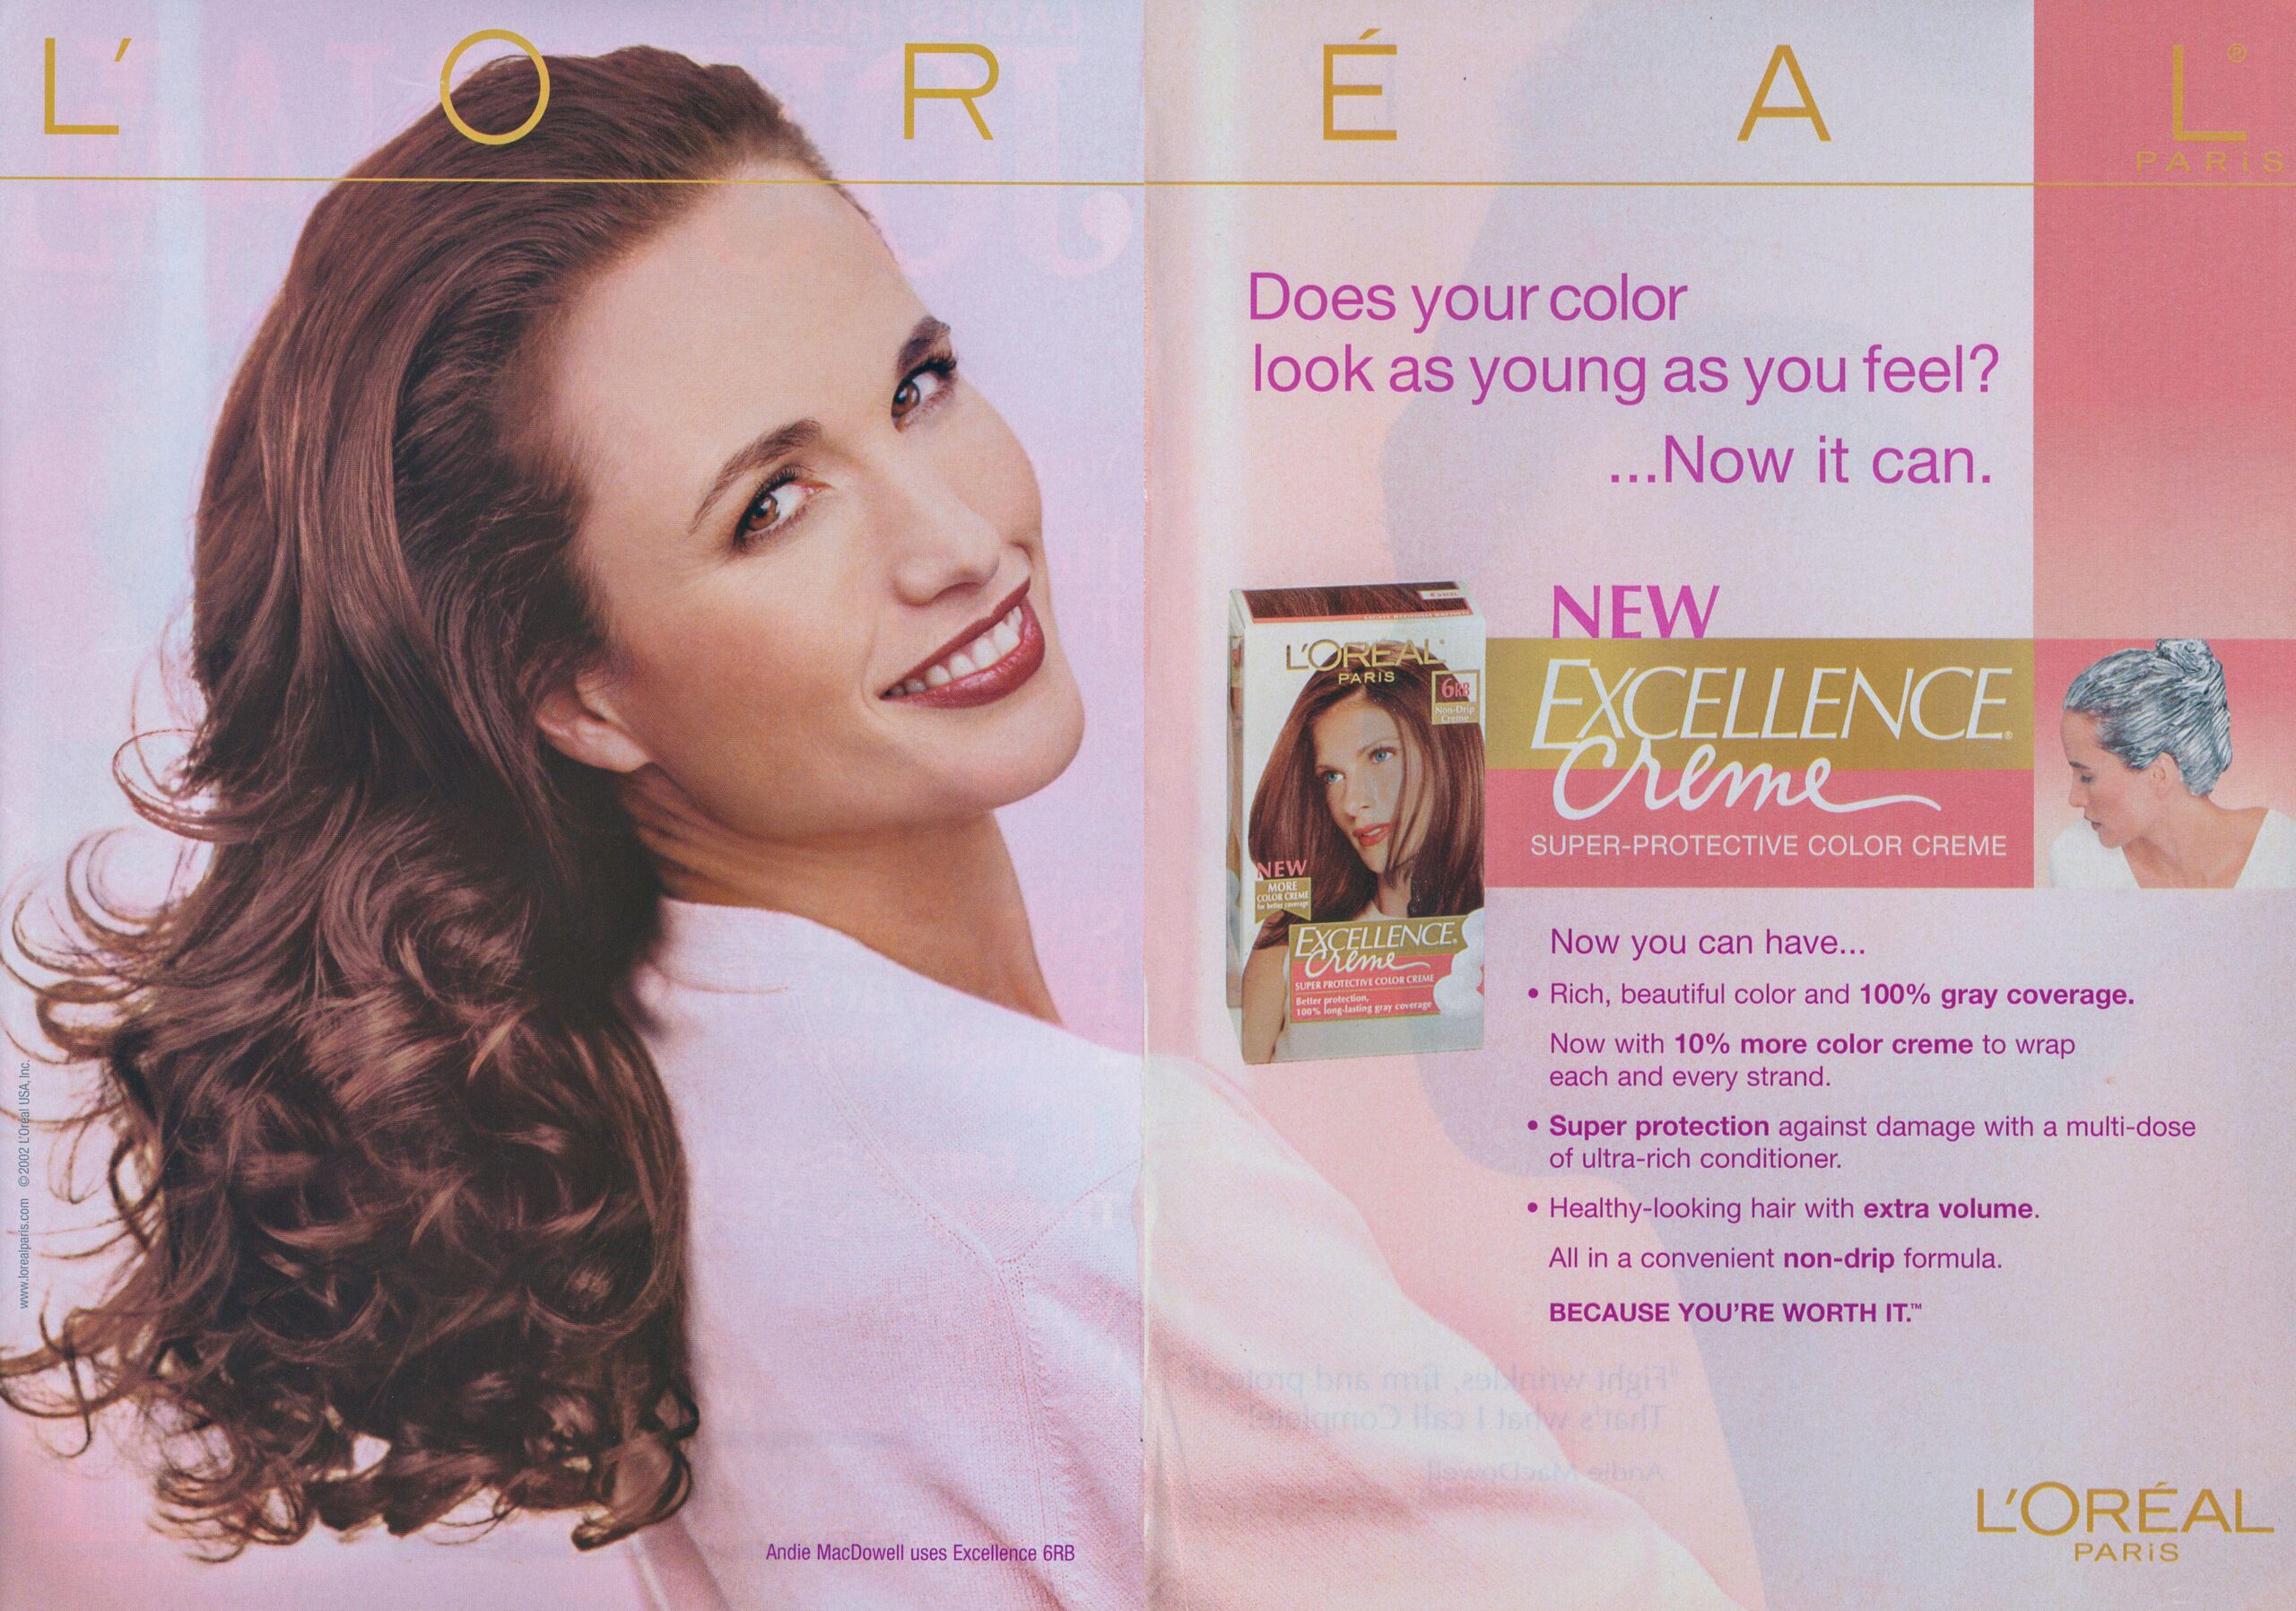 Andie MacDowell signed up as a spokesmodel in 1986 and is the company’s longest-serving 'face'